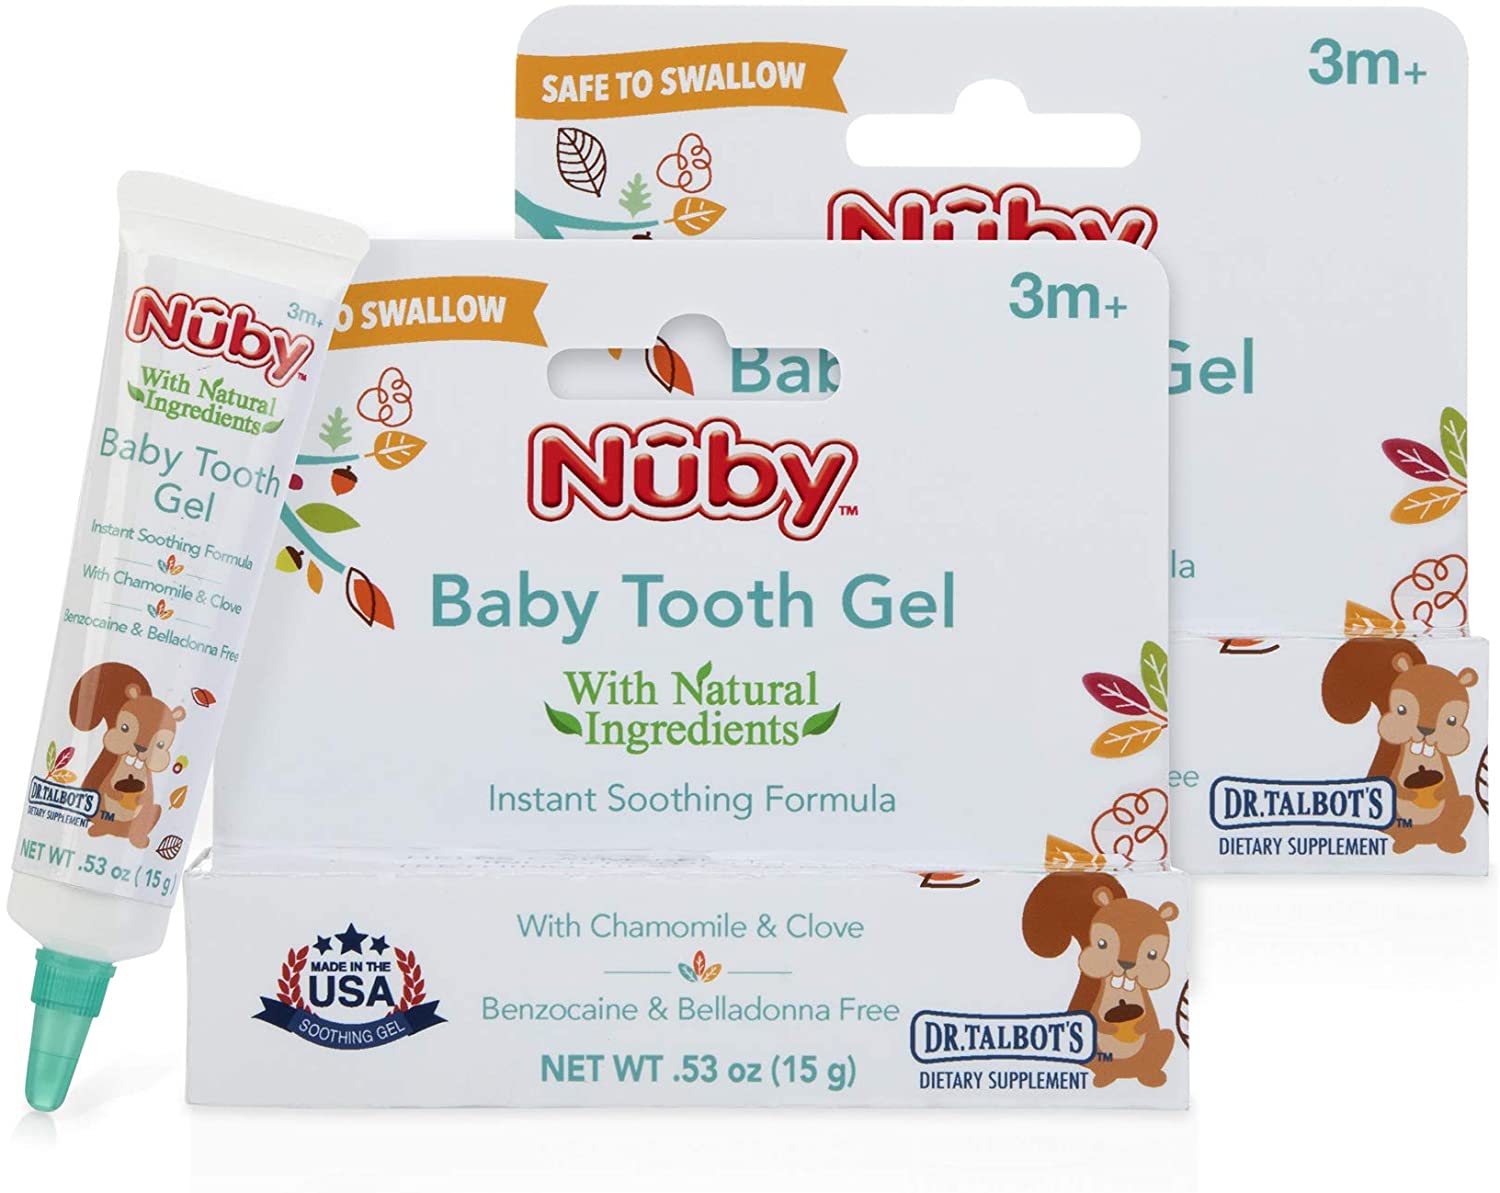 2 Pack benzocaine Free Nuby Natural Baby Tooth Gel for Sore Gums 1.06 Oz Belladonna Free 